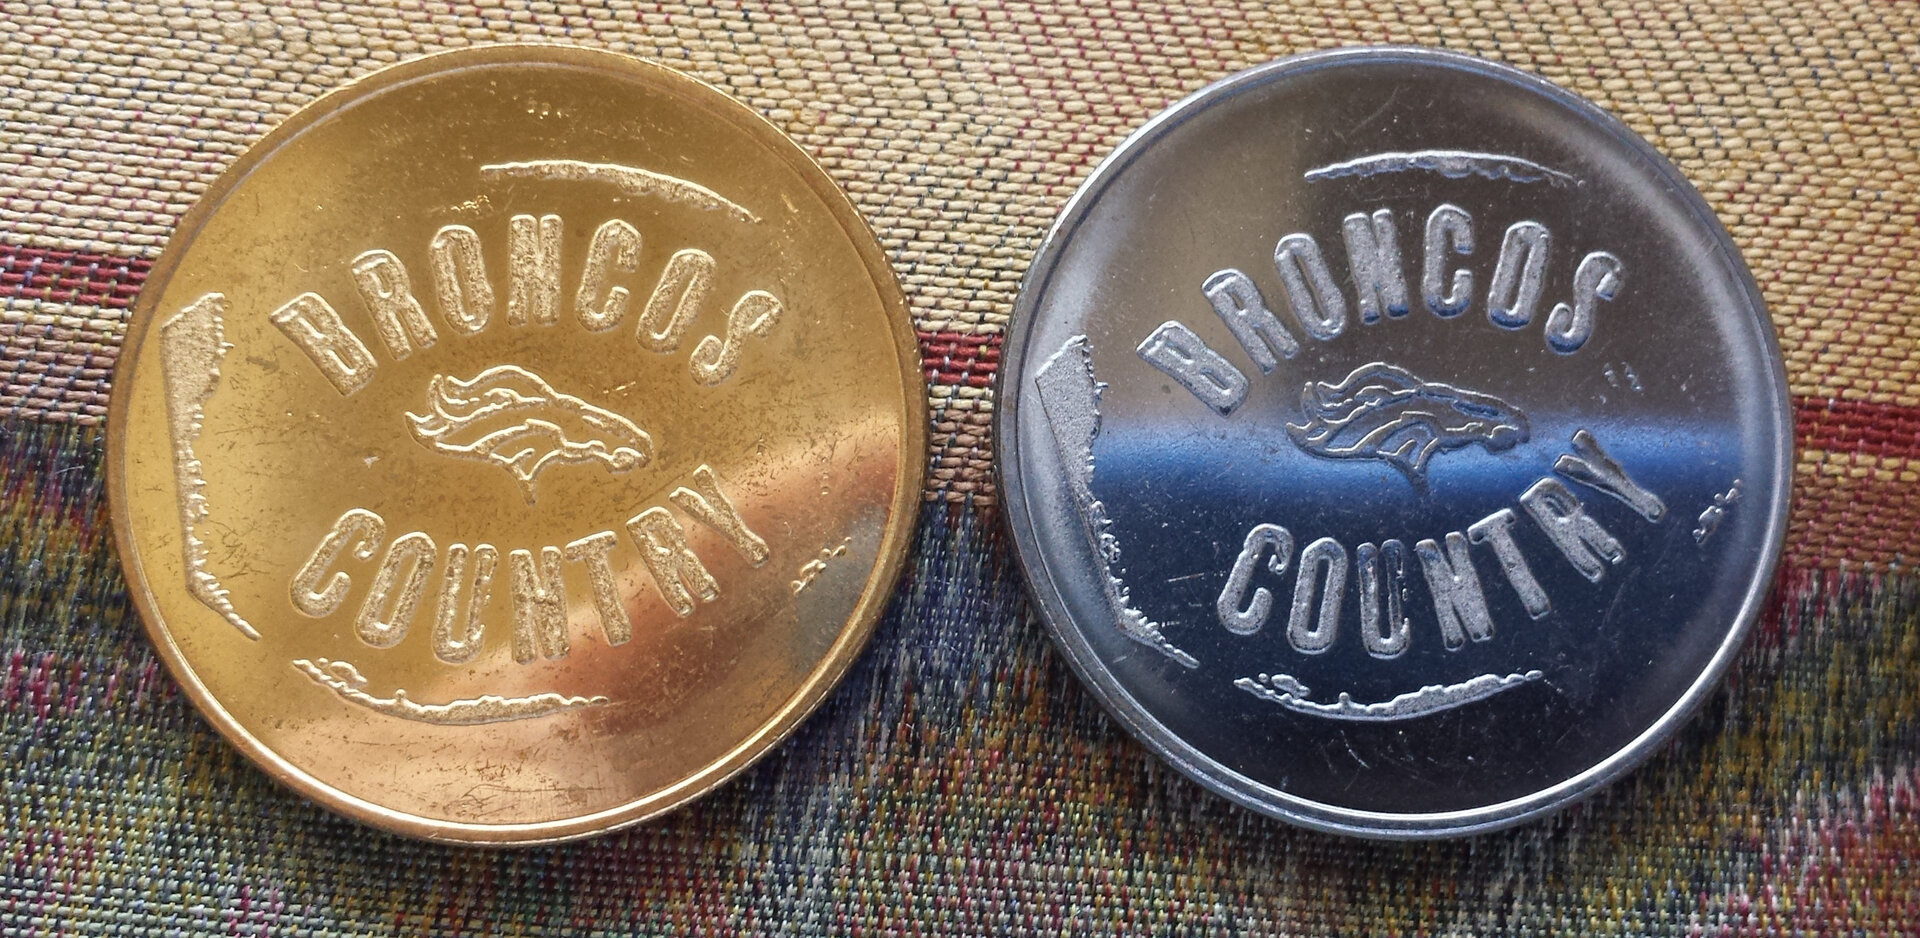 Reverse Gold and Silver Broncos.jpg